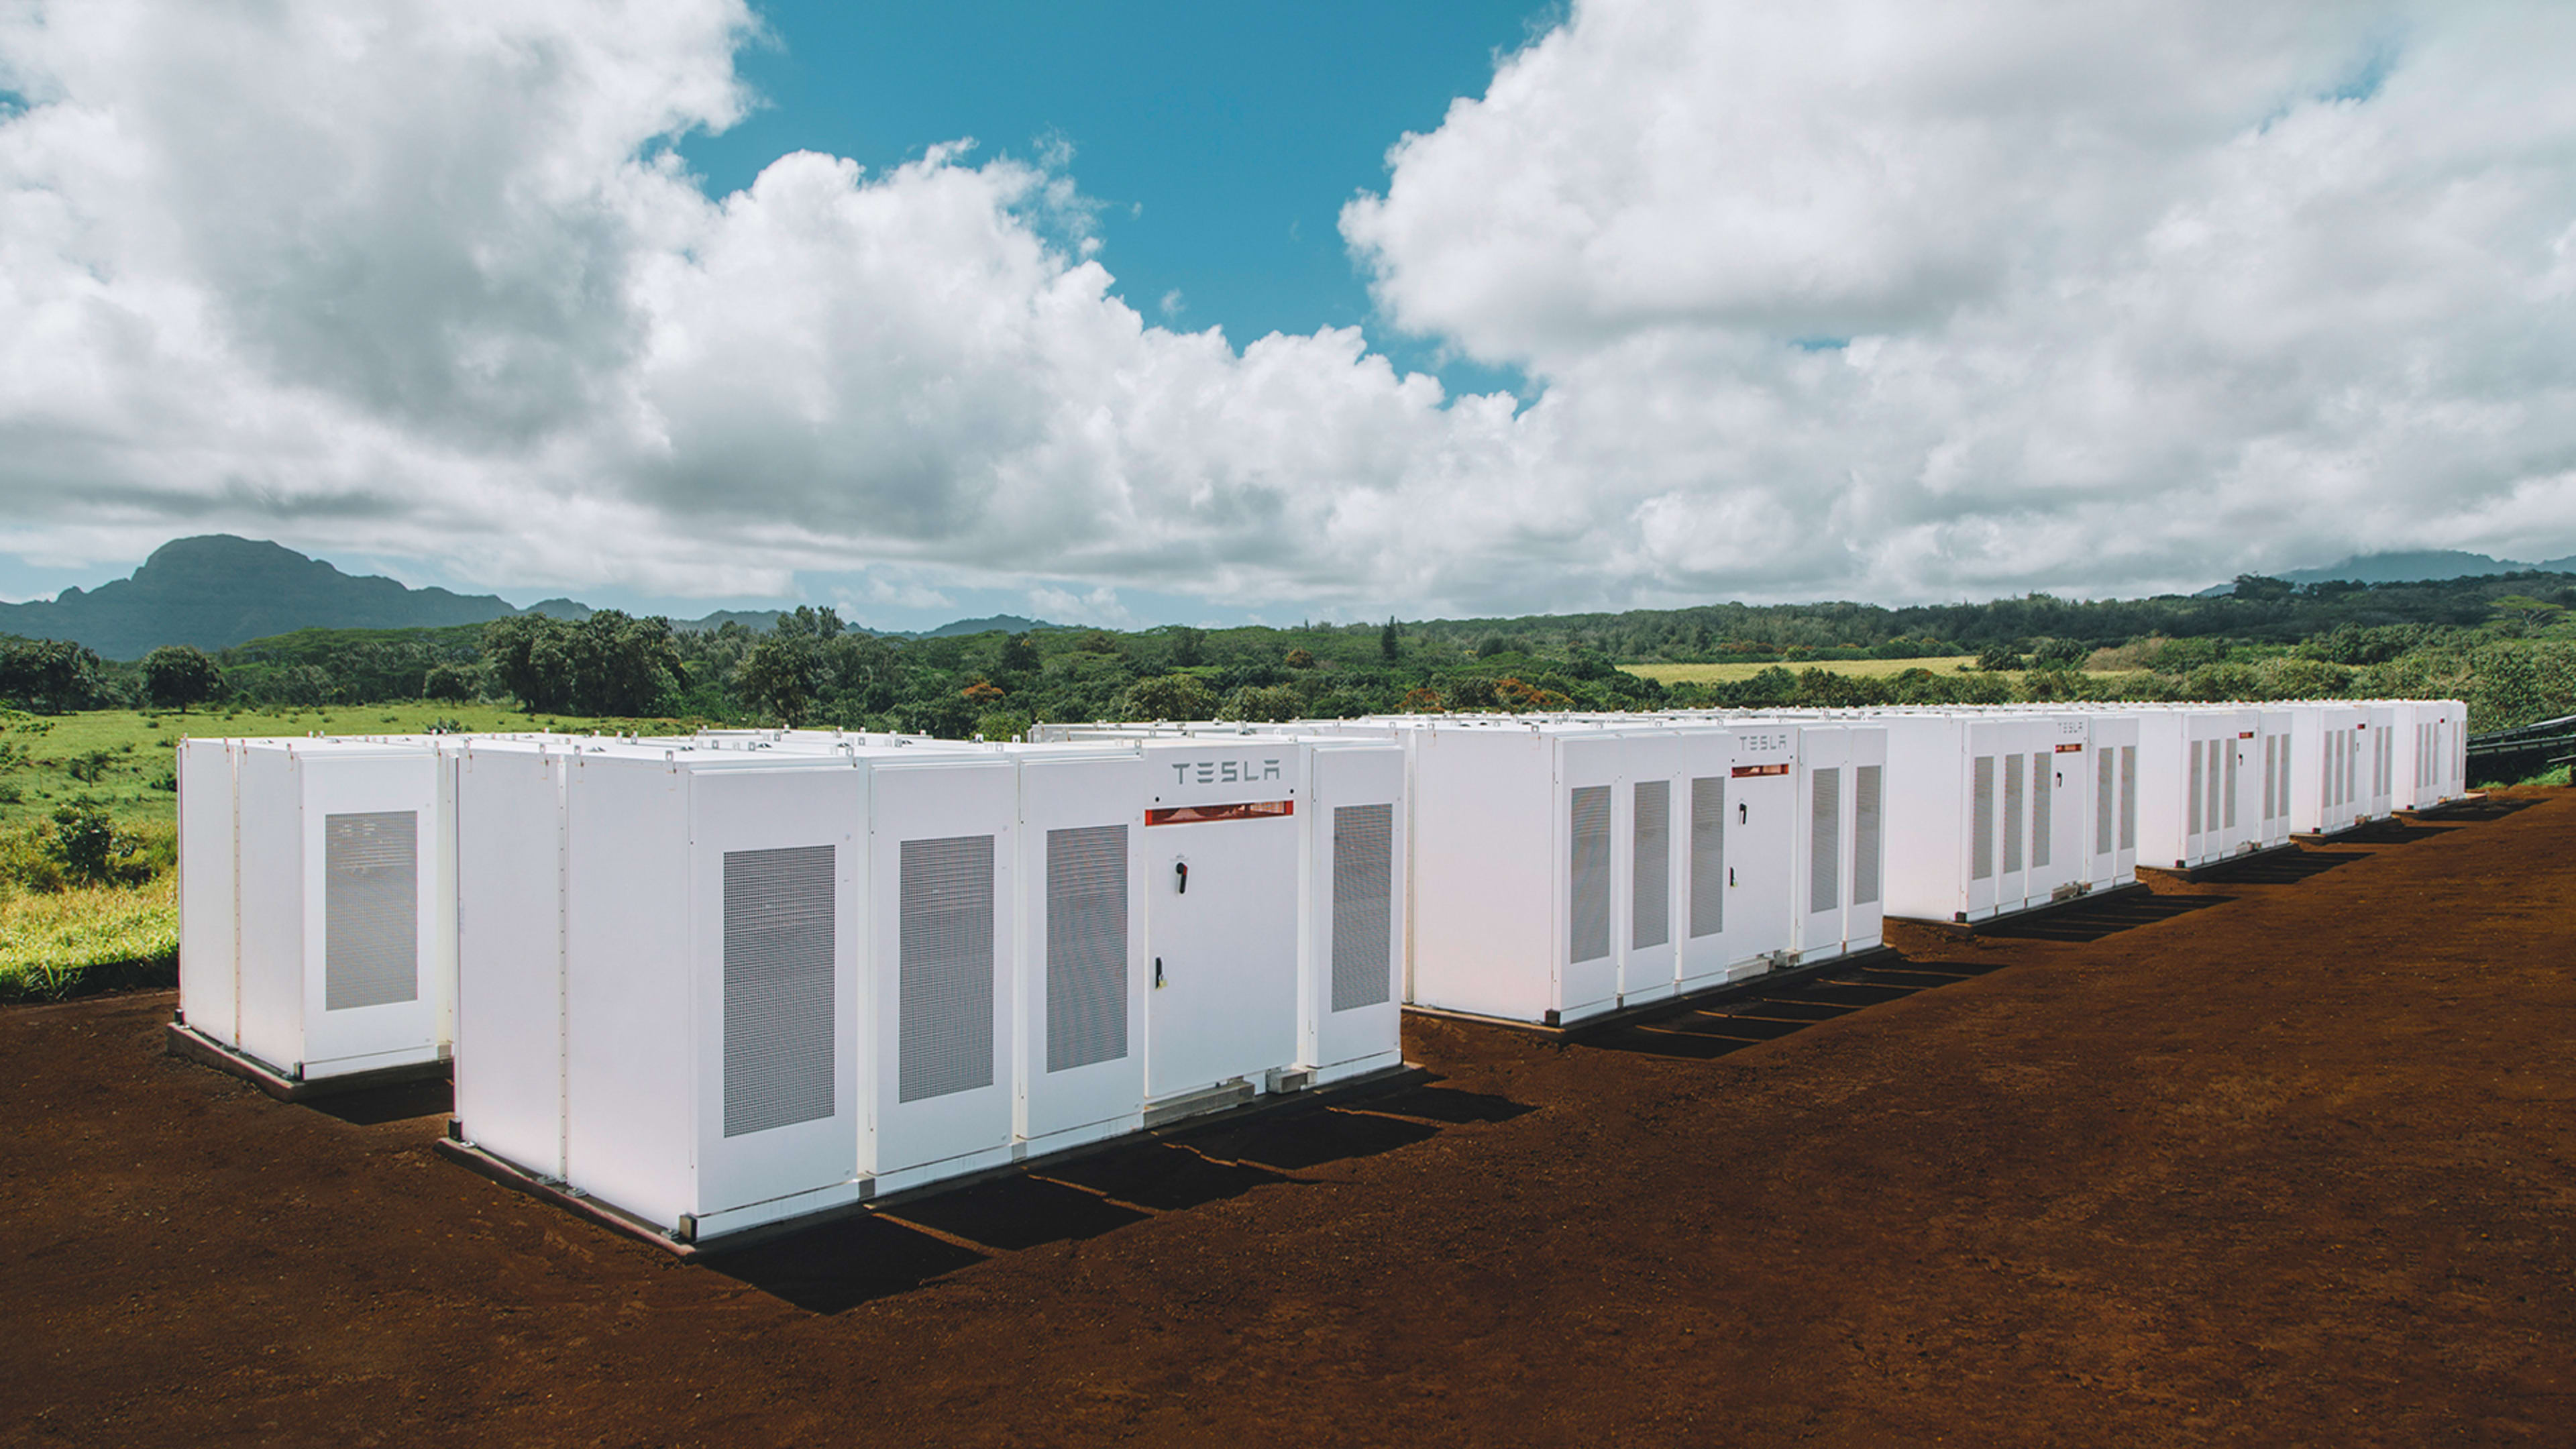 Tesla has installed a truly huge amount of energy storage